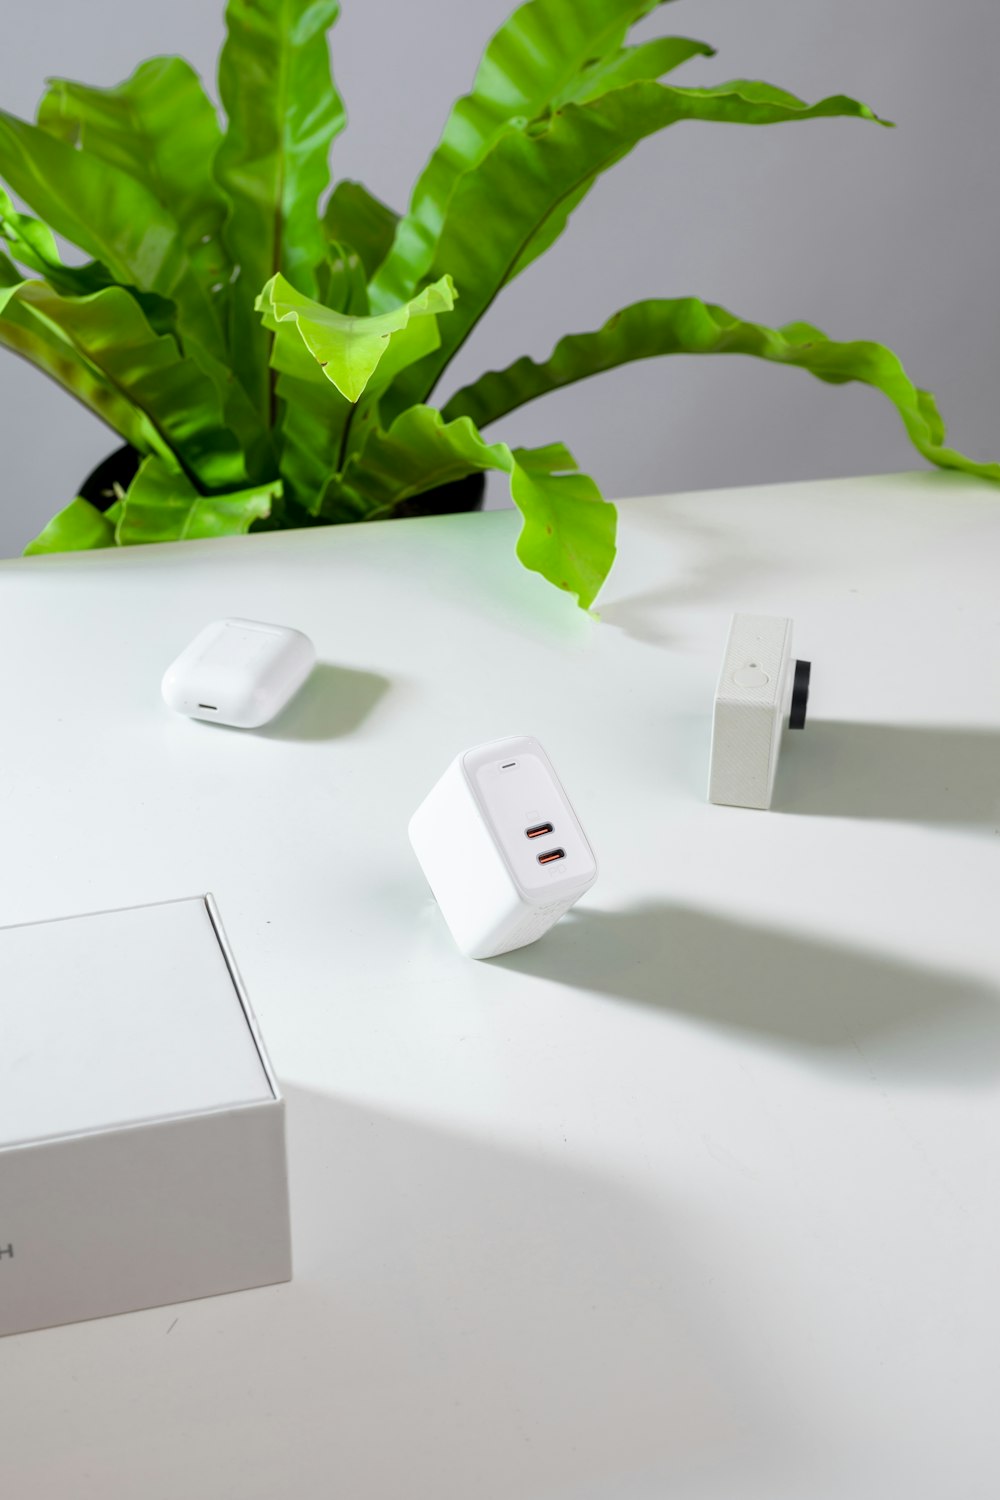 white apple charger adapter on white table